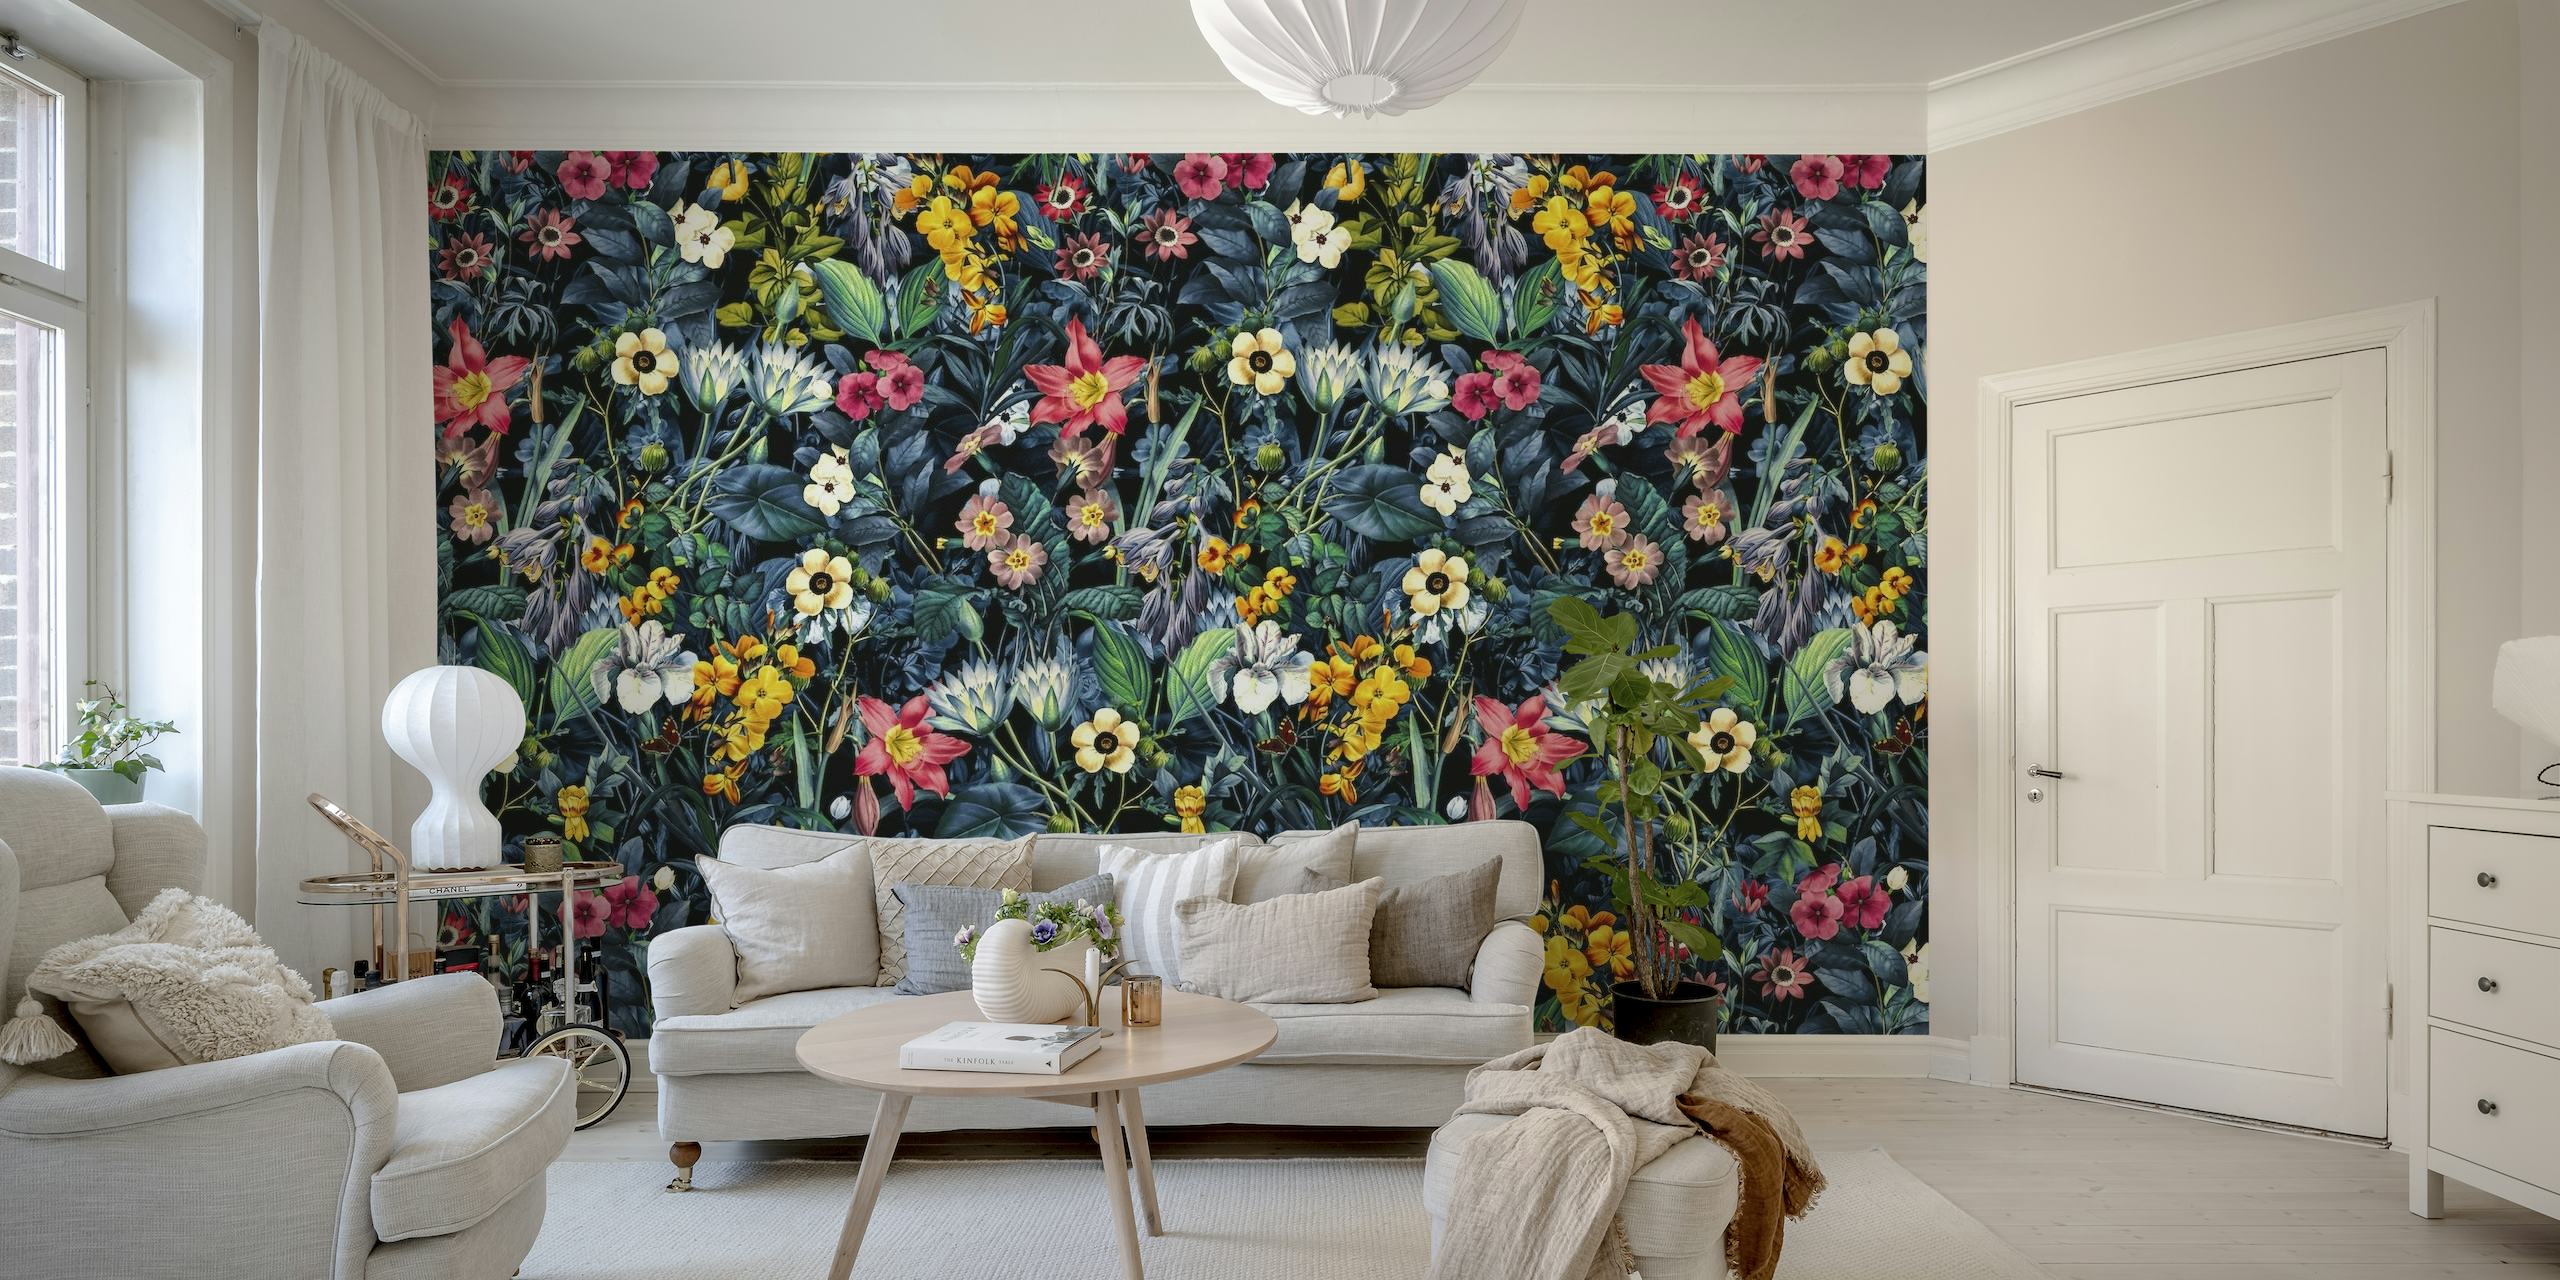 Colorful exotic garden wall mural with an assortment of flowers and lush foliage